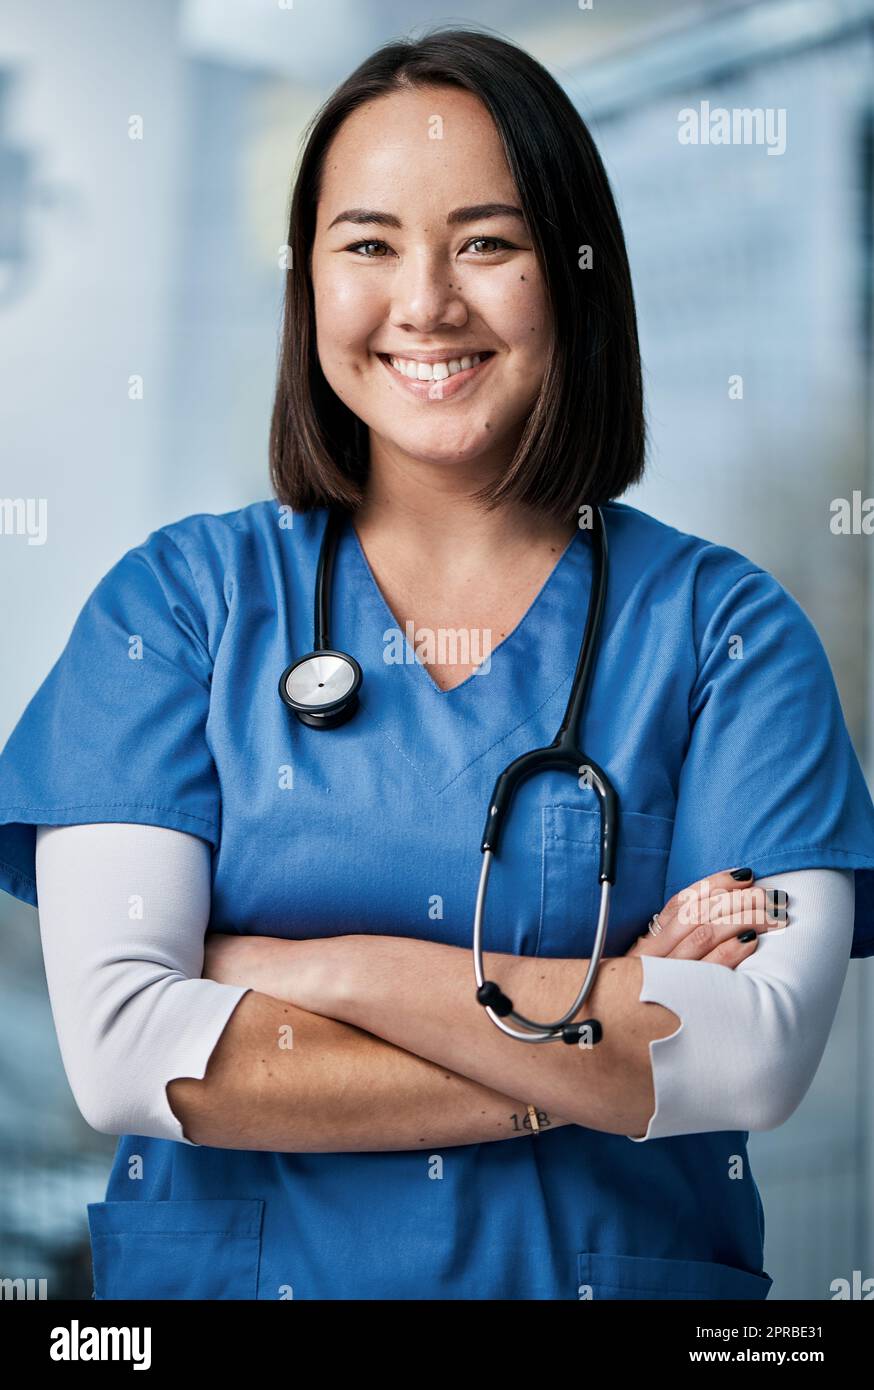 Providing the attention and treatment you deserve. Portrait of a medical practitioner standing in a hospital. Stock Photo